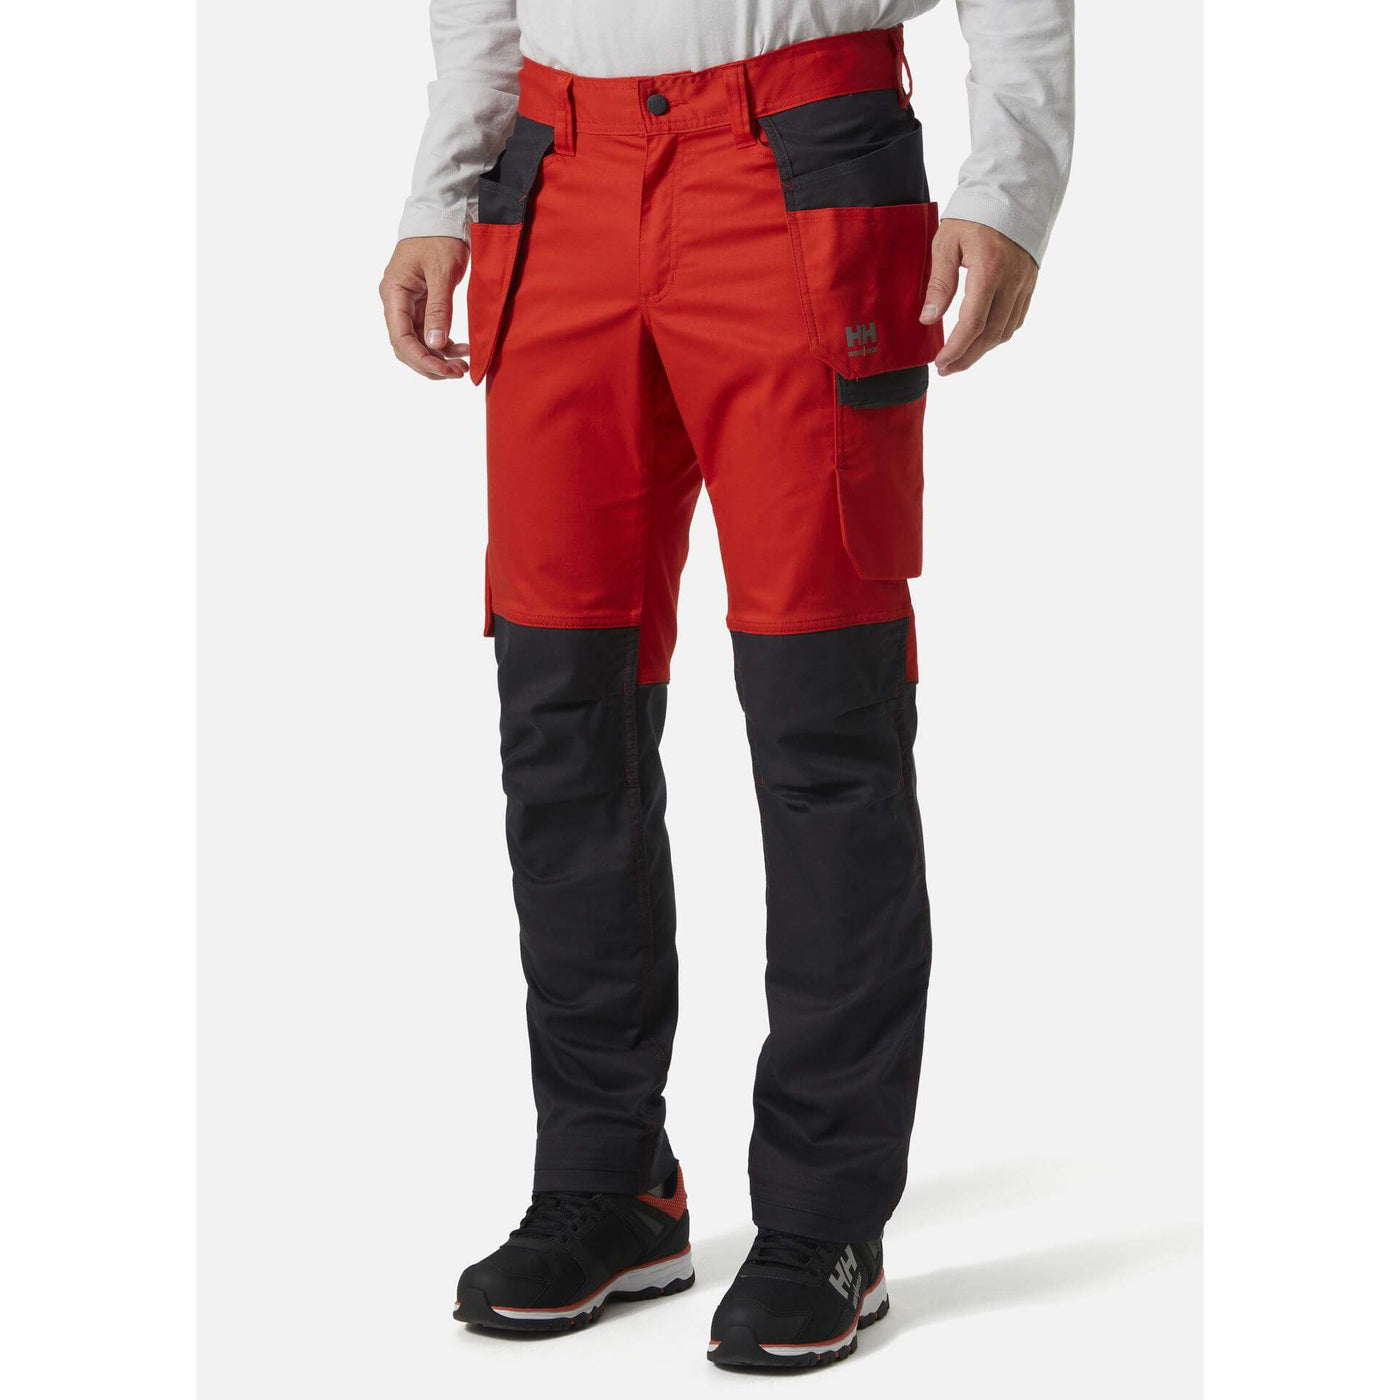 Helly Hansen Manchester Stretch Work Trousers Alert Red/Ebony 1 Front #colour_alert-red-ebony